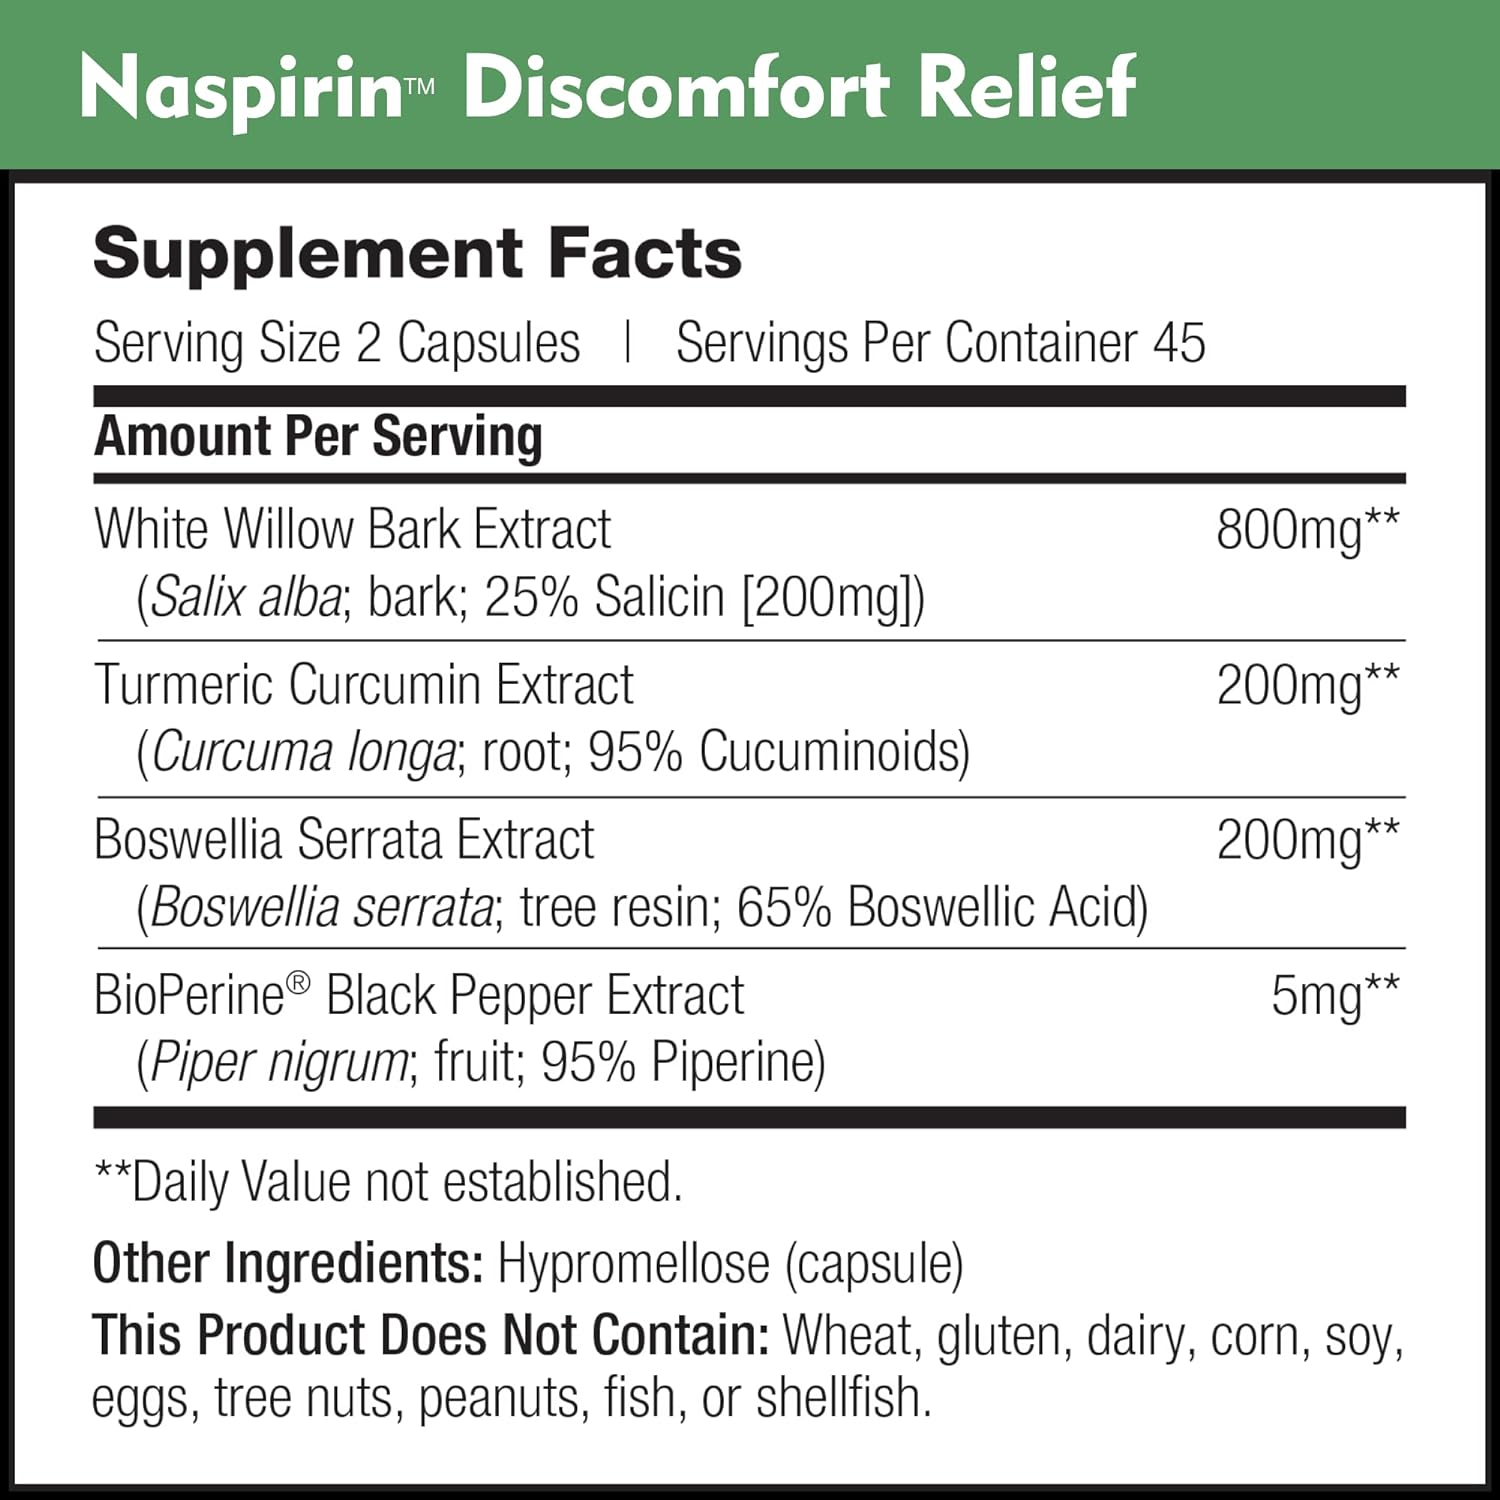 Daily Nutra Naspirin Willow Bark Formula - Natural Relief for The Head